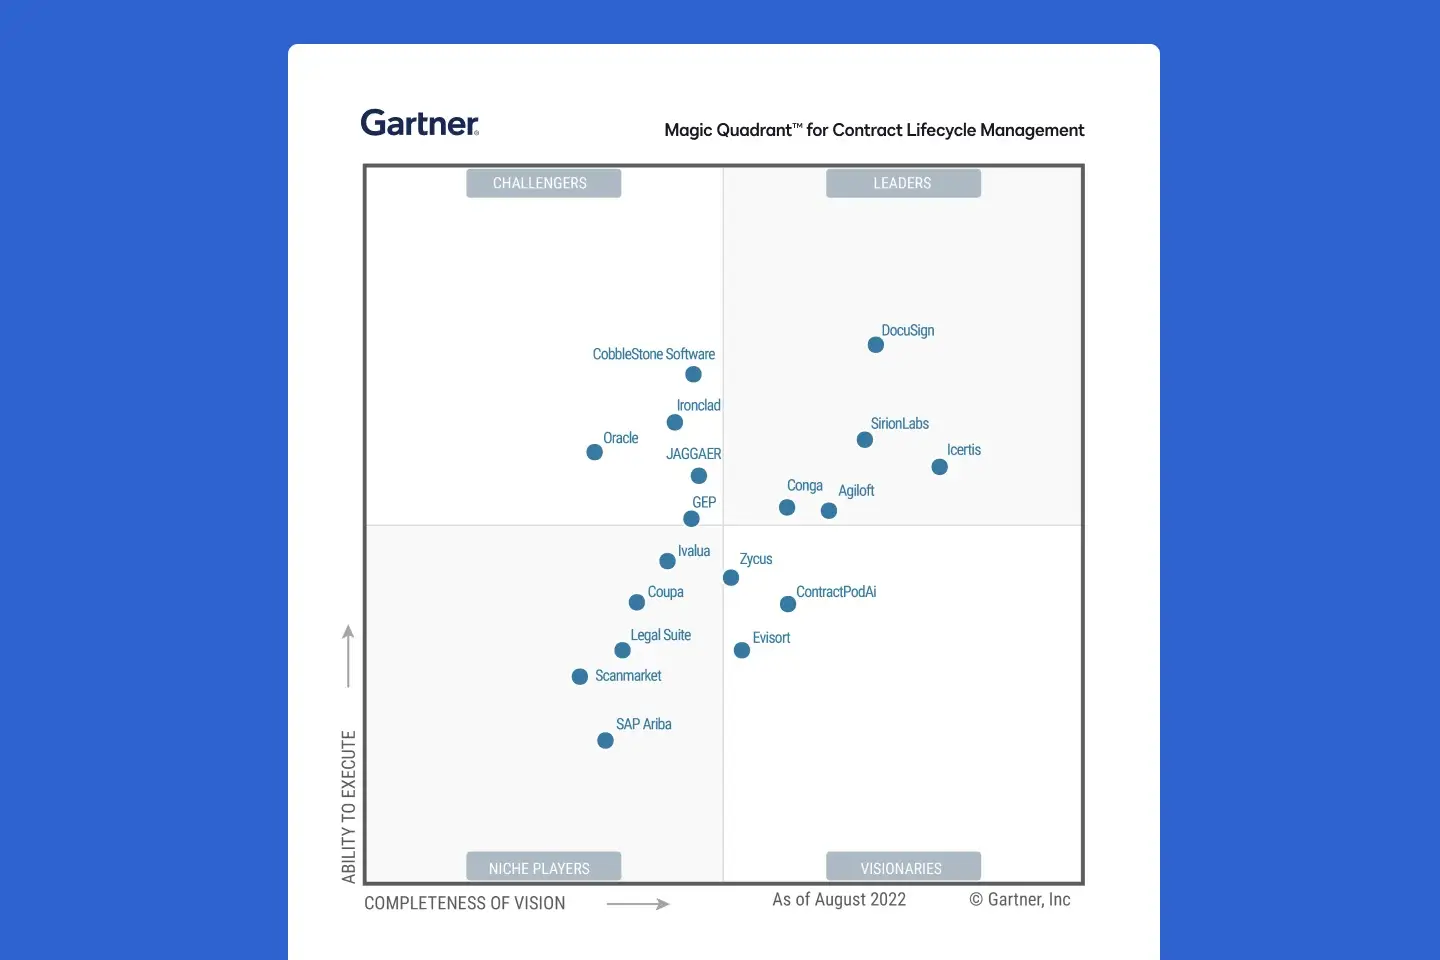 The 2022 Gartner Magic Quadrant for Contract Lifecycle Management shows DocuSign as a Leader